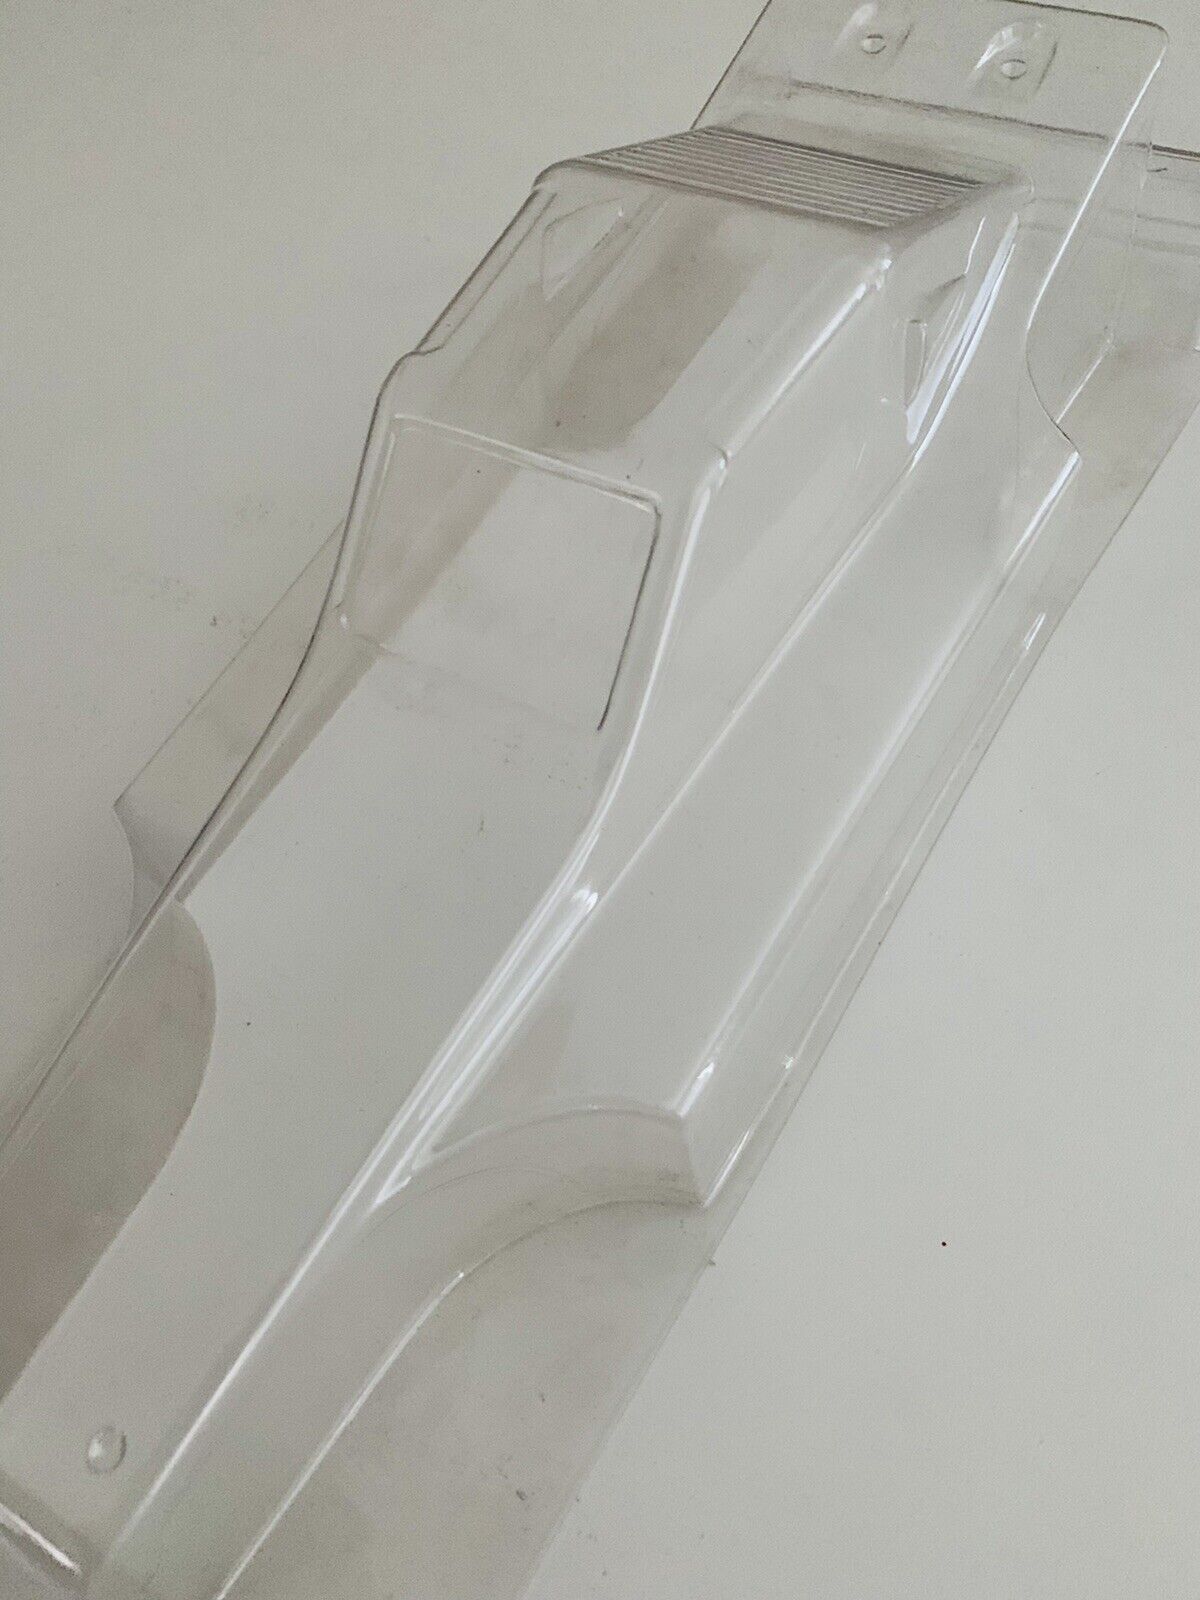 SEAL限定商品 RARE GENUINE SG RACING COYOTE VINTAGE AND WING BODY 10 1 CLEAR 今季も再入荷